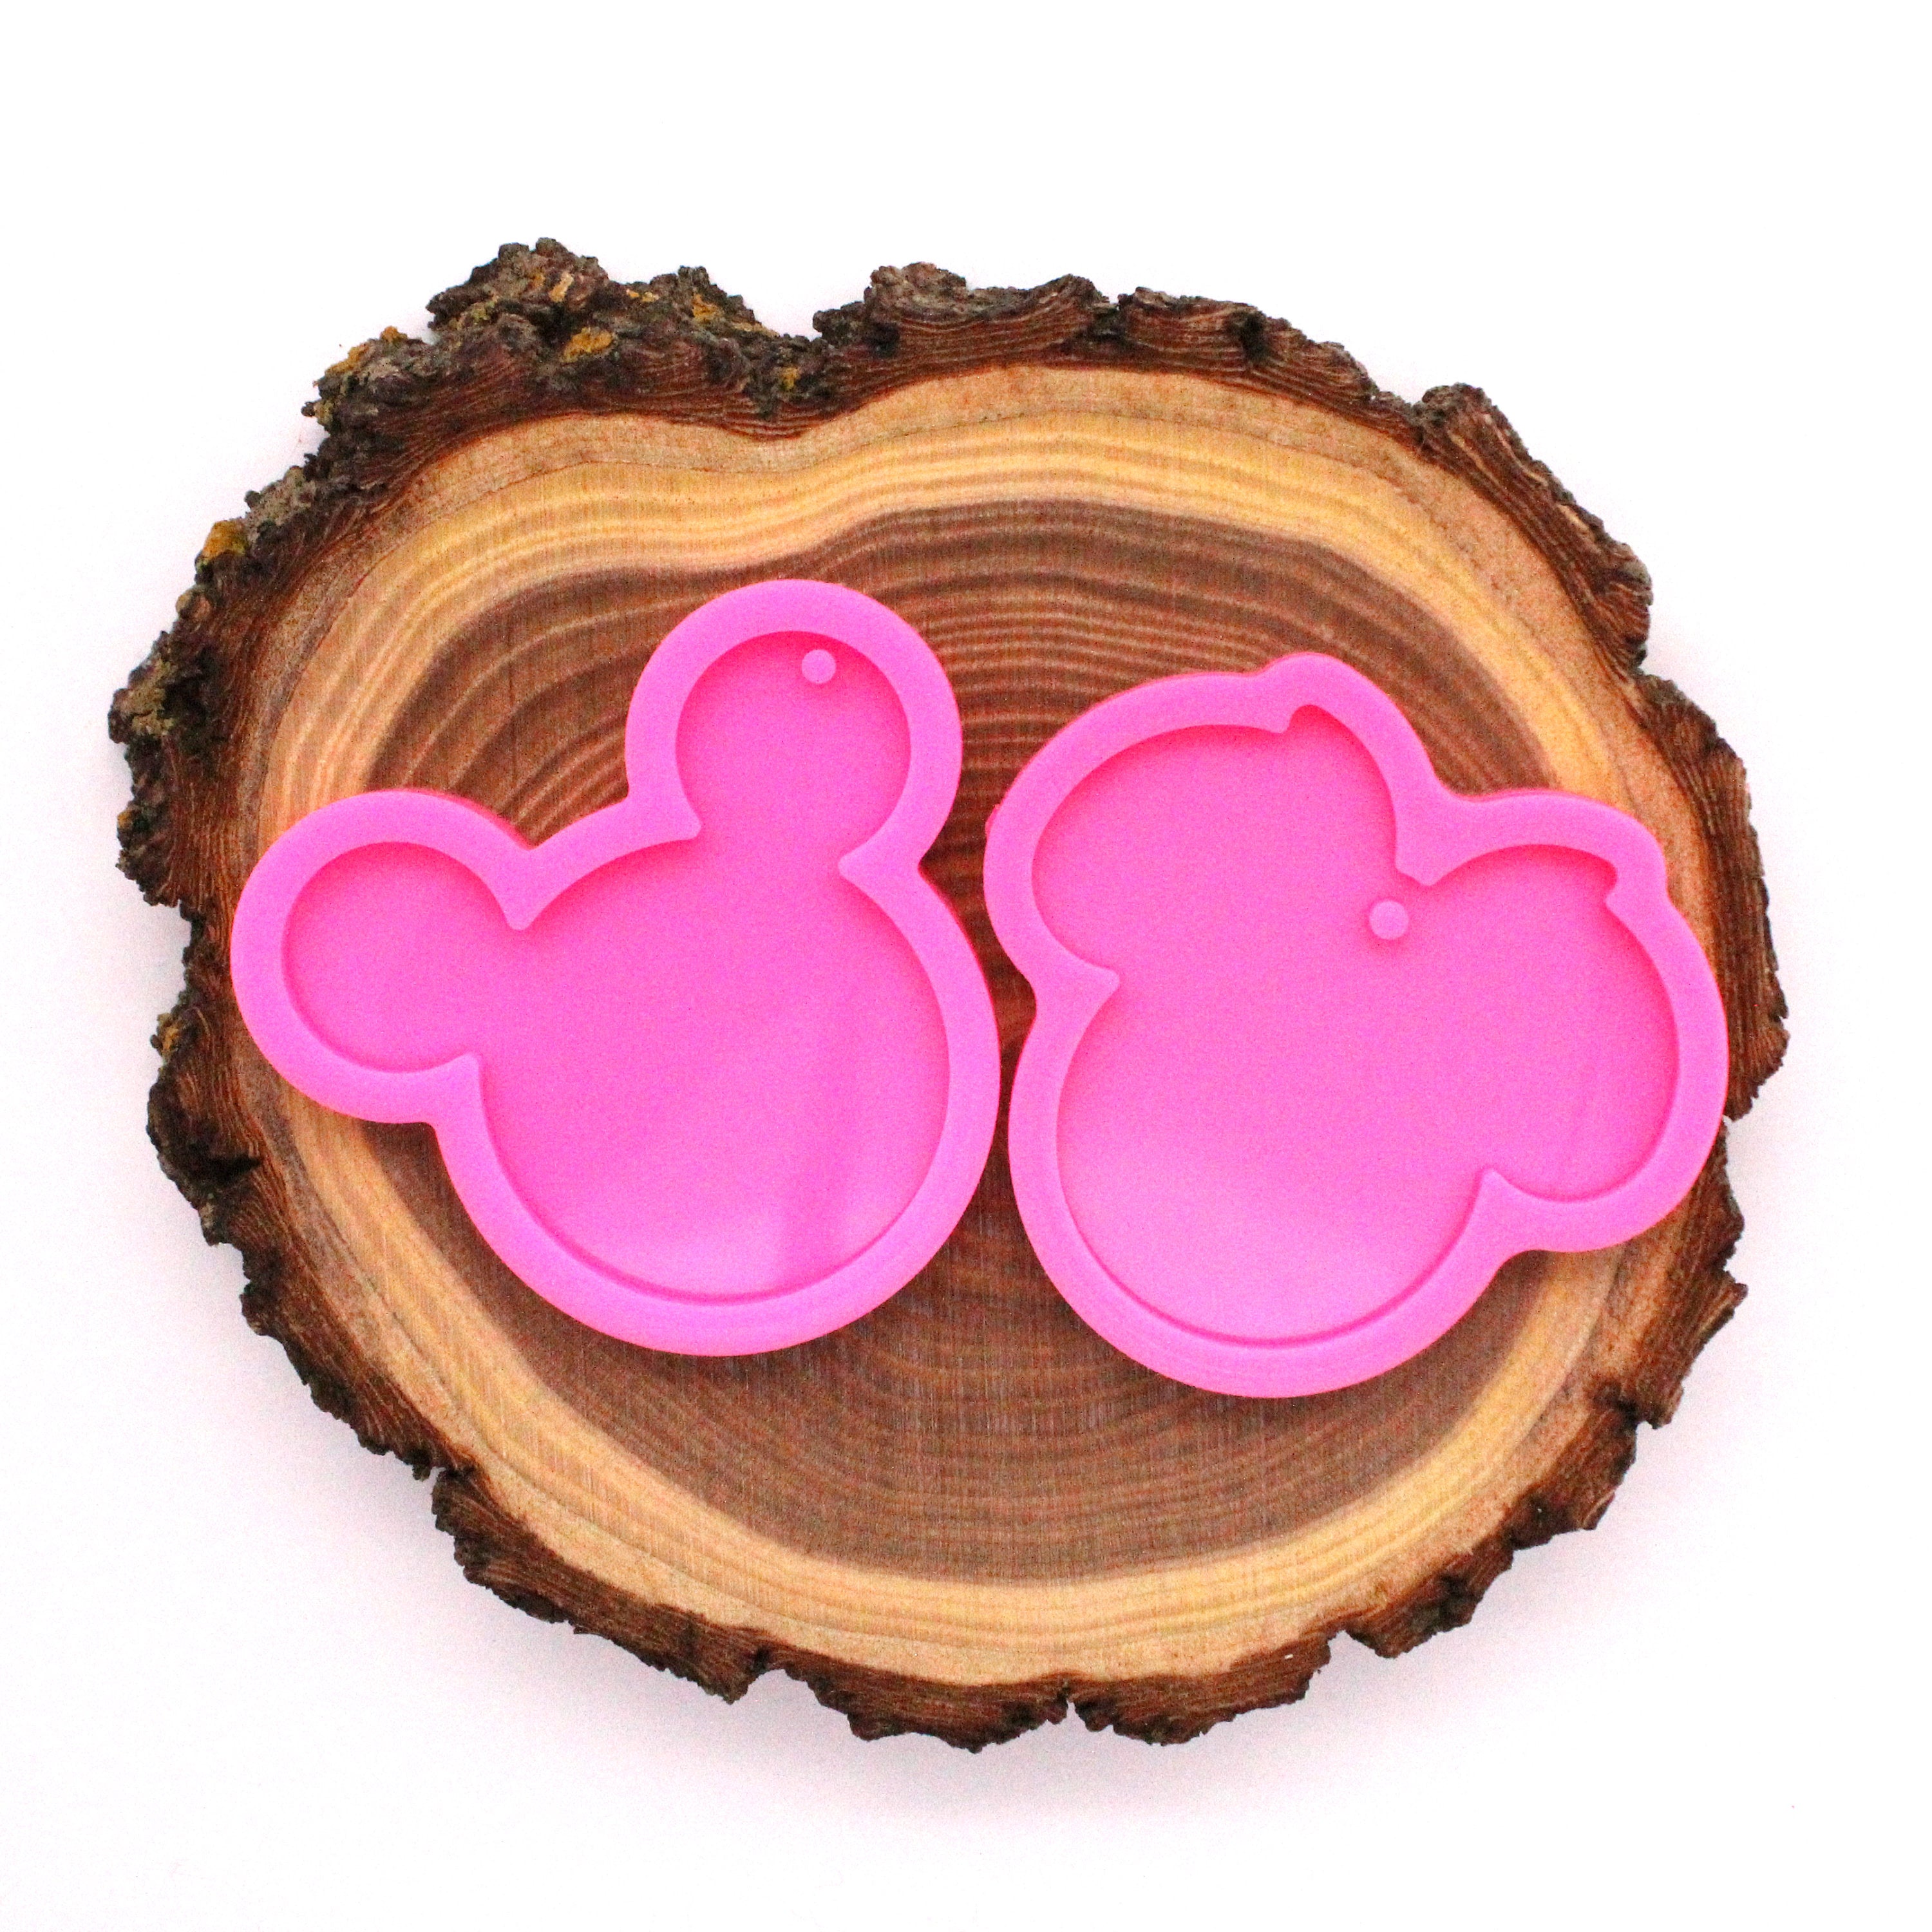 Mouse Shiny Silicone Mold for Epoxy Resin Keychain - Jewelry Making - Ornament Silicone Mold